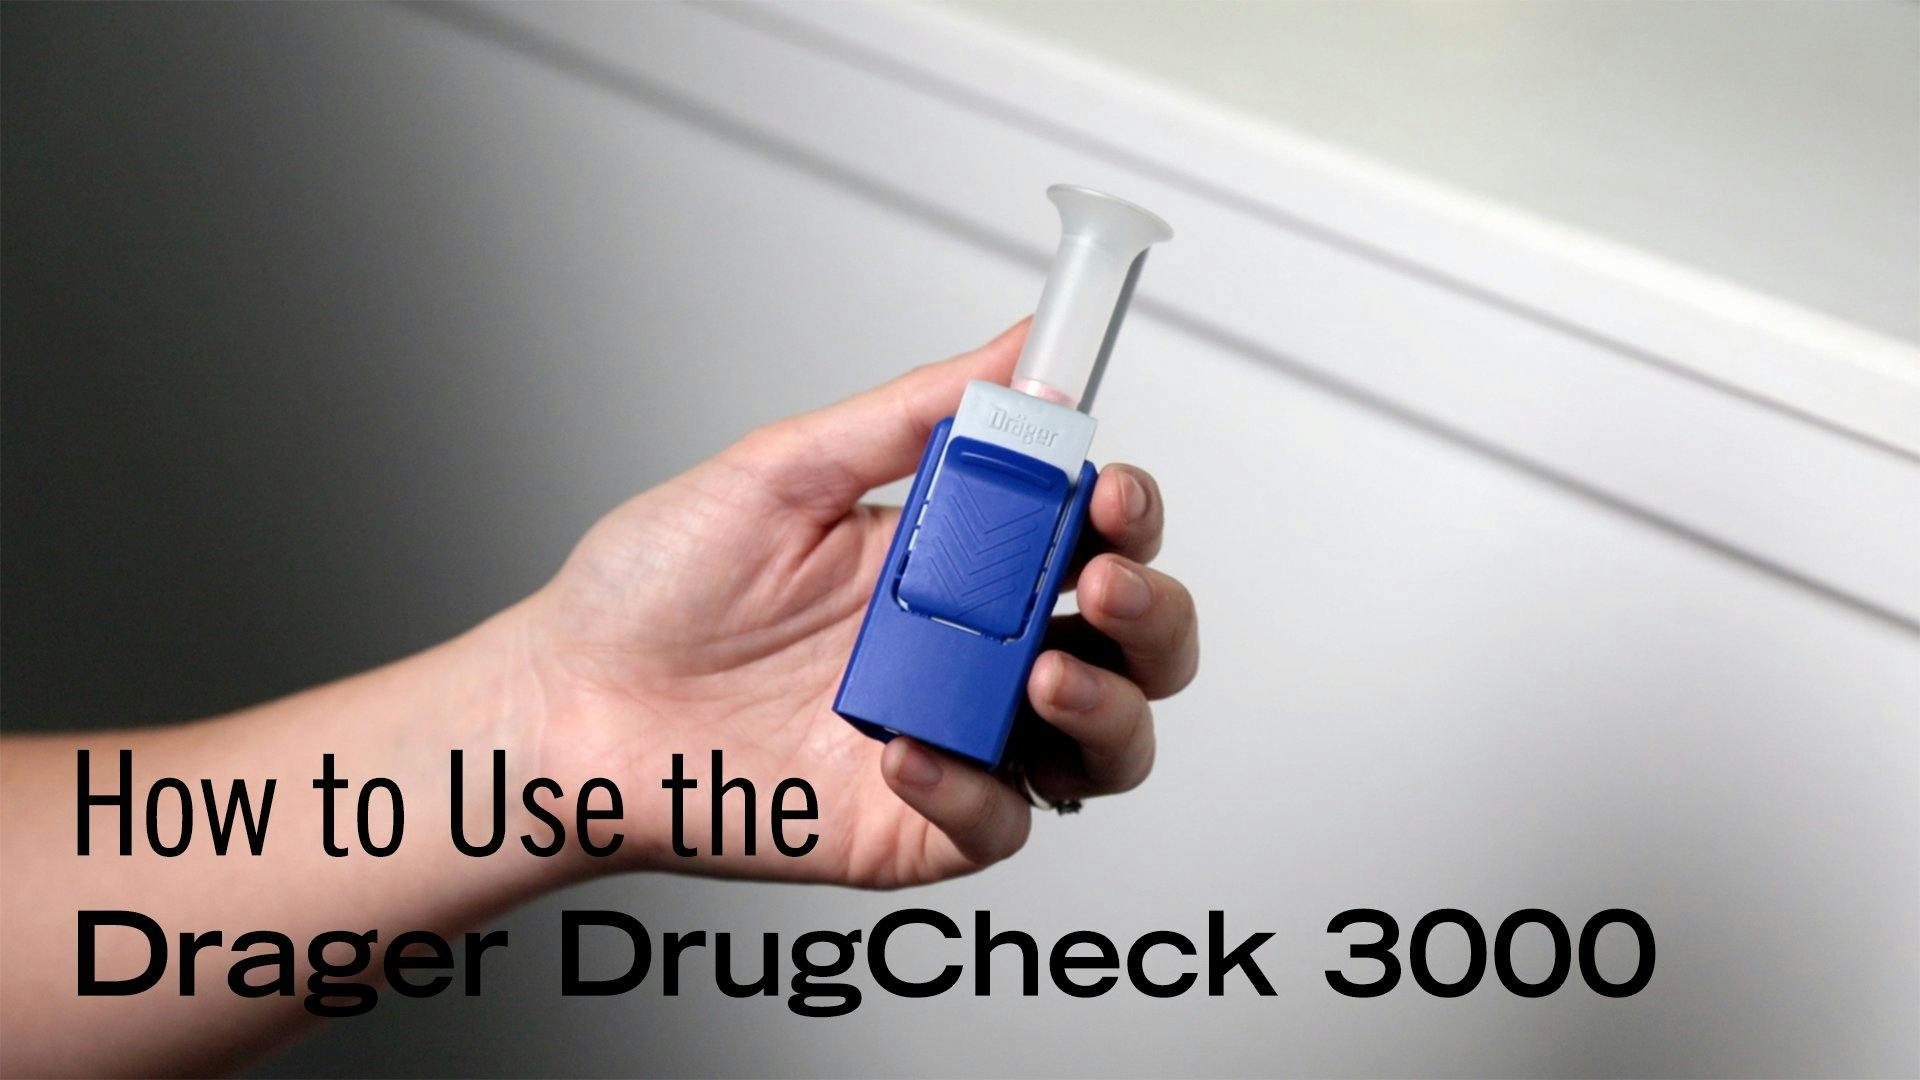 Drager DrugCheck 3000 - How to Use It